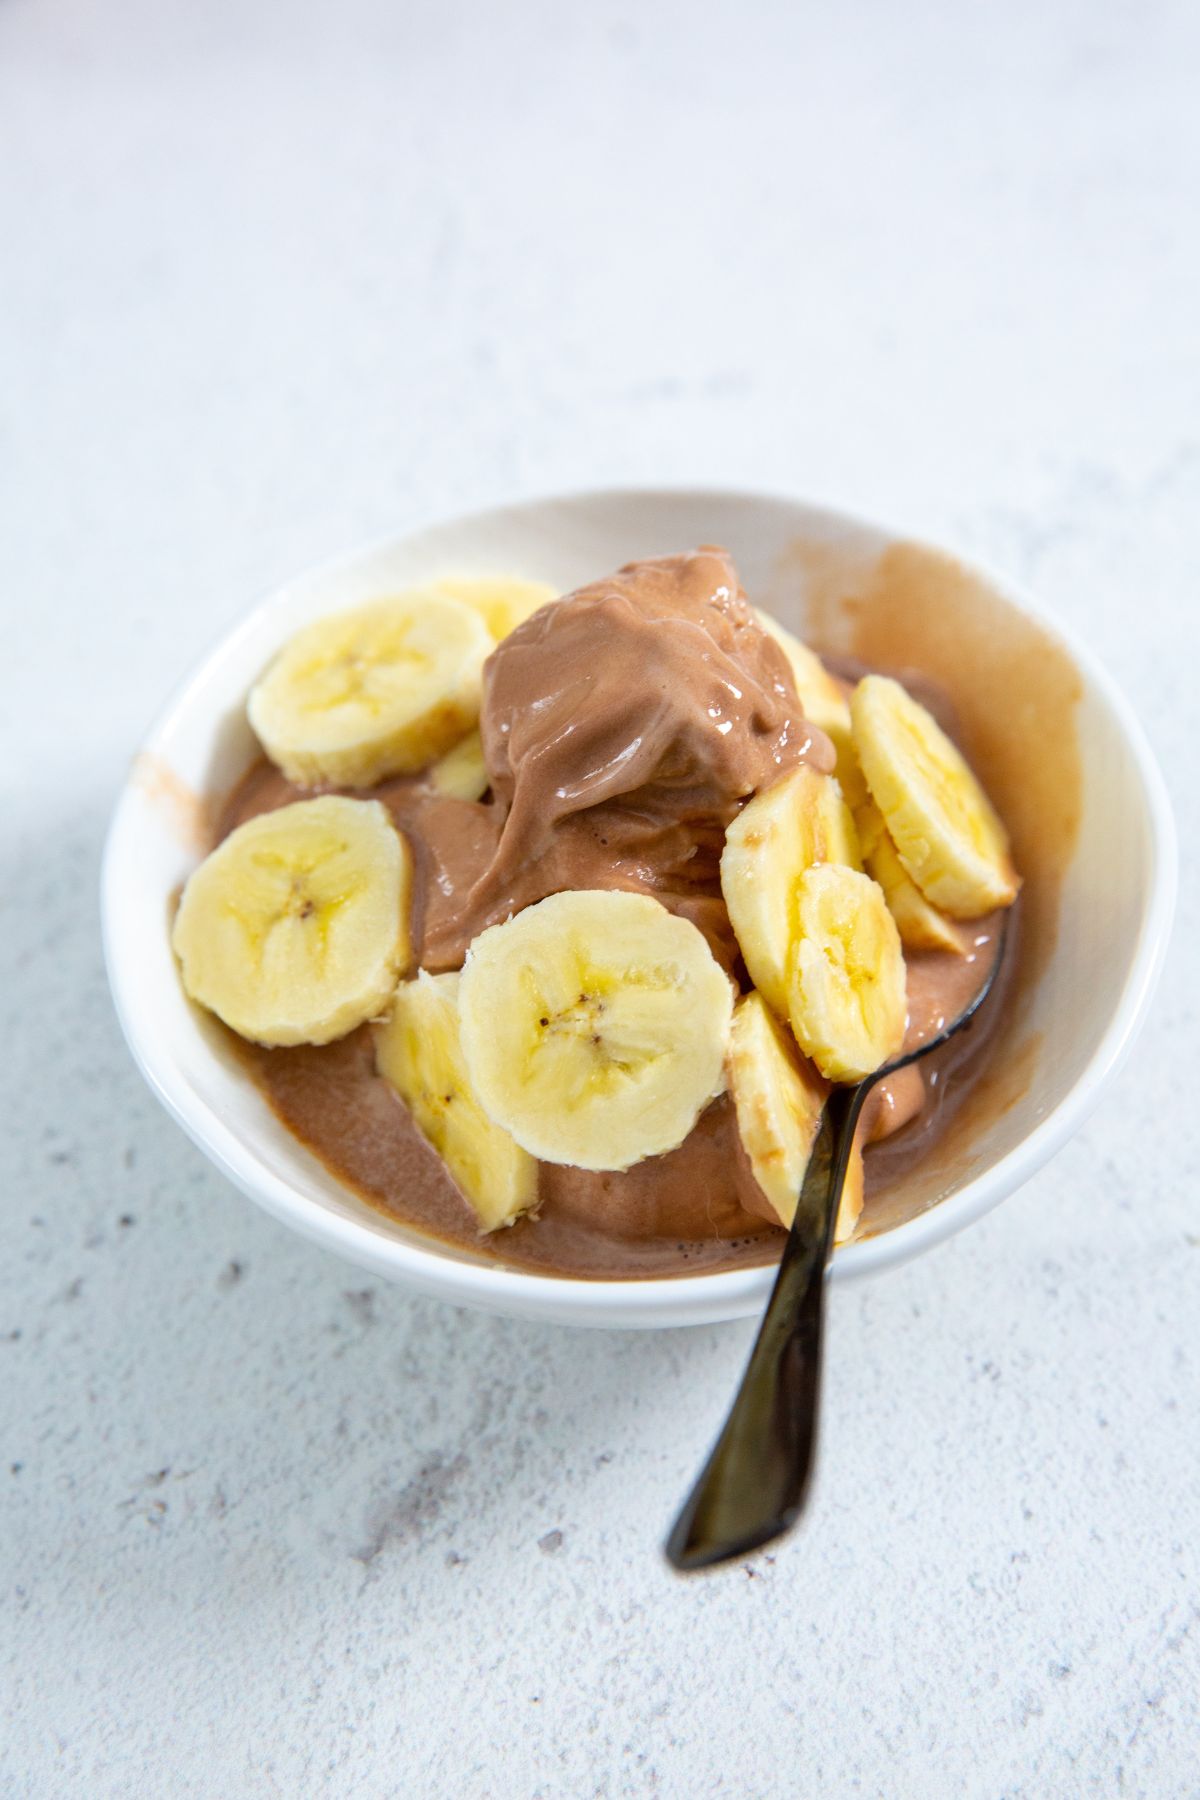 Chocolate Banana Protein Ice Cream in a white bowl with banana slices on top and a spoon in it